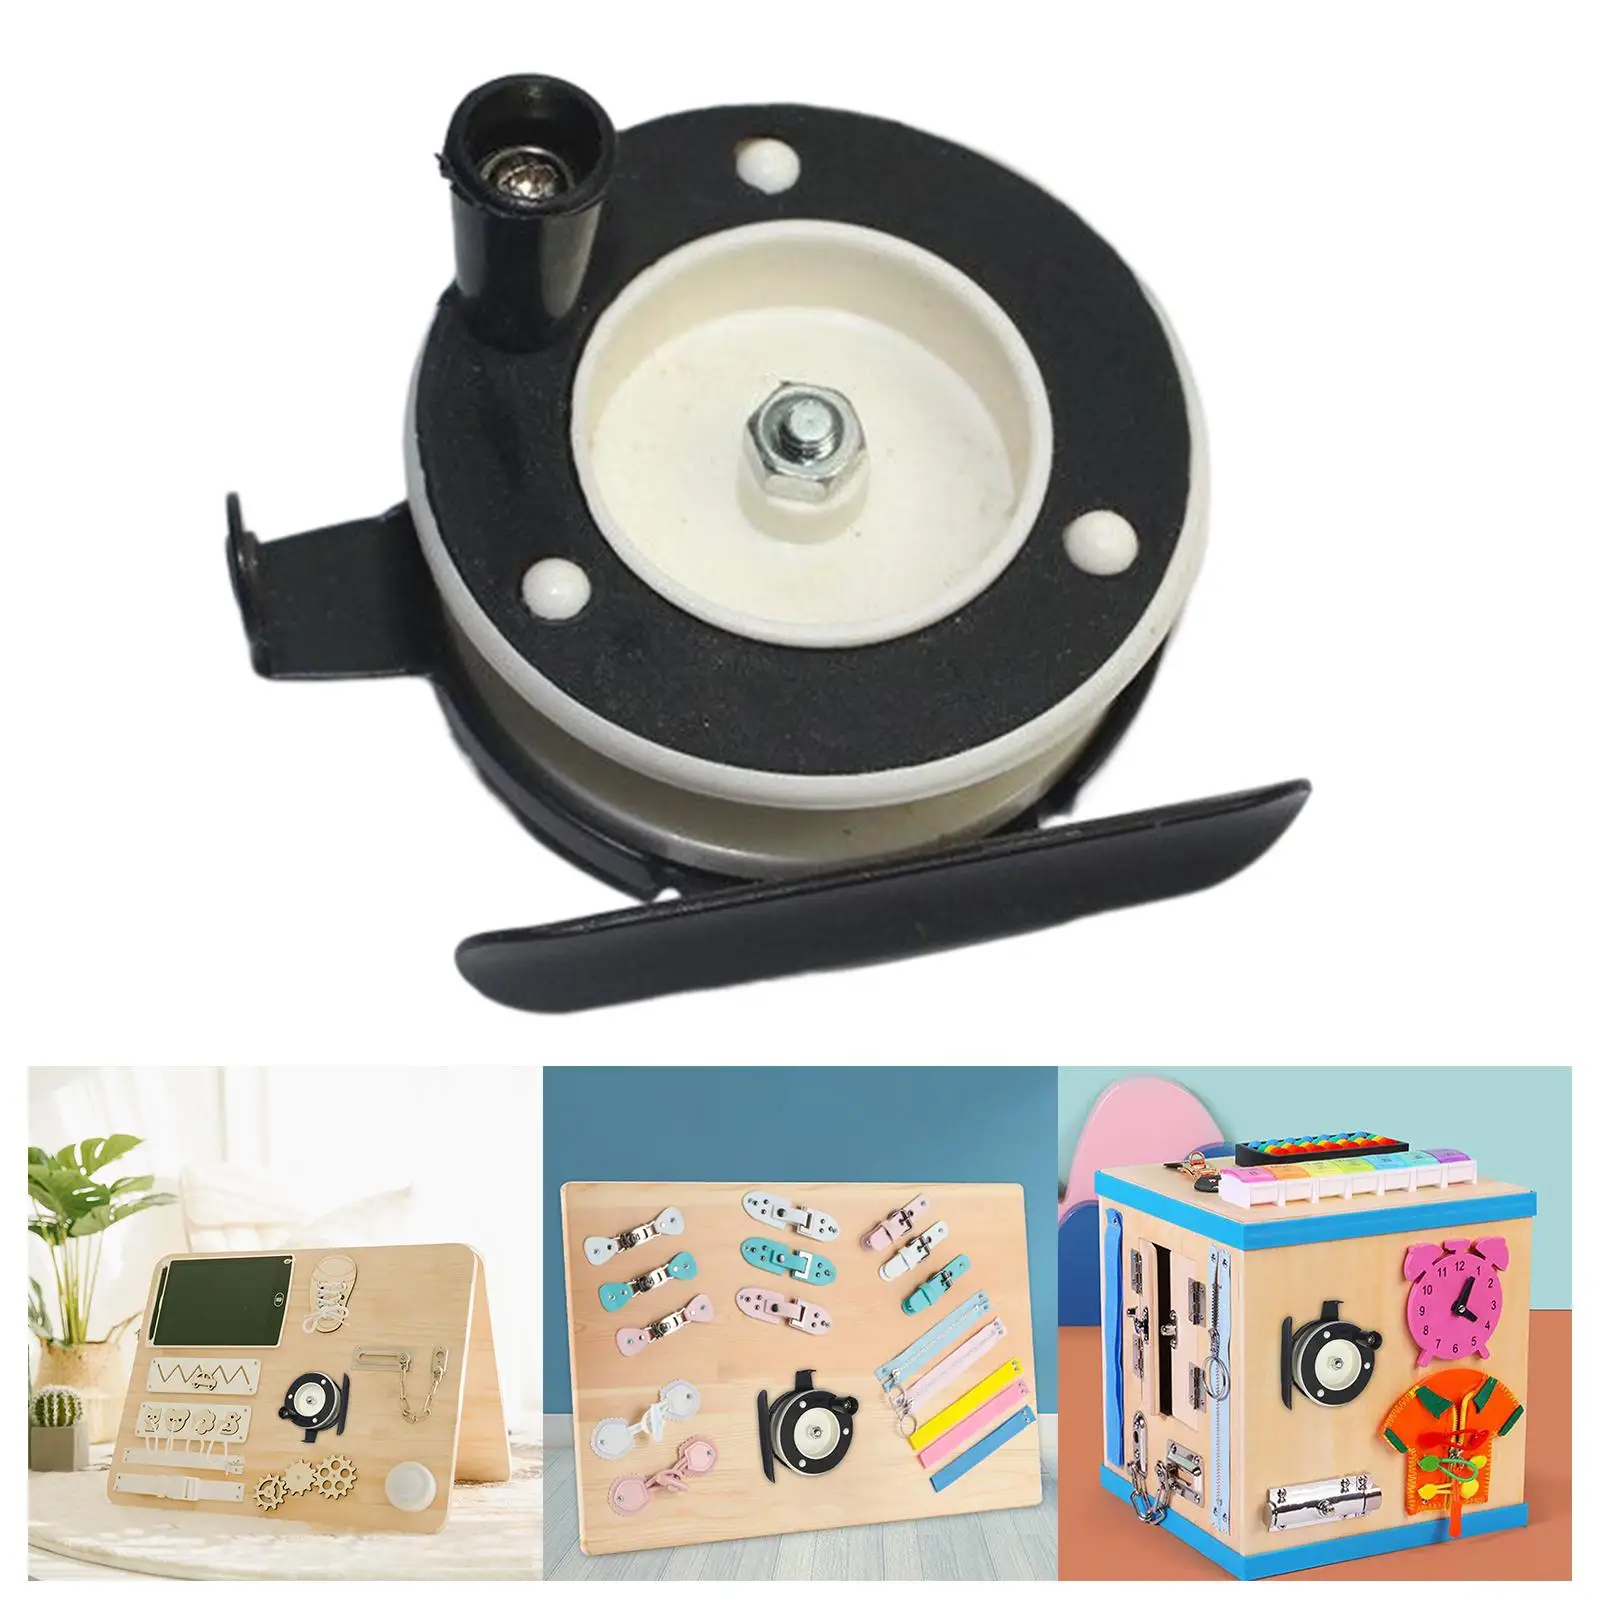 Montessori Busy Board DIY Accessories Fishing Reel,Learning Skill Toy Developmental Cognition Game,Early Educational Toys